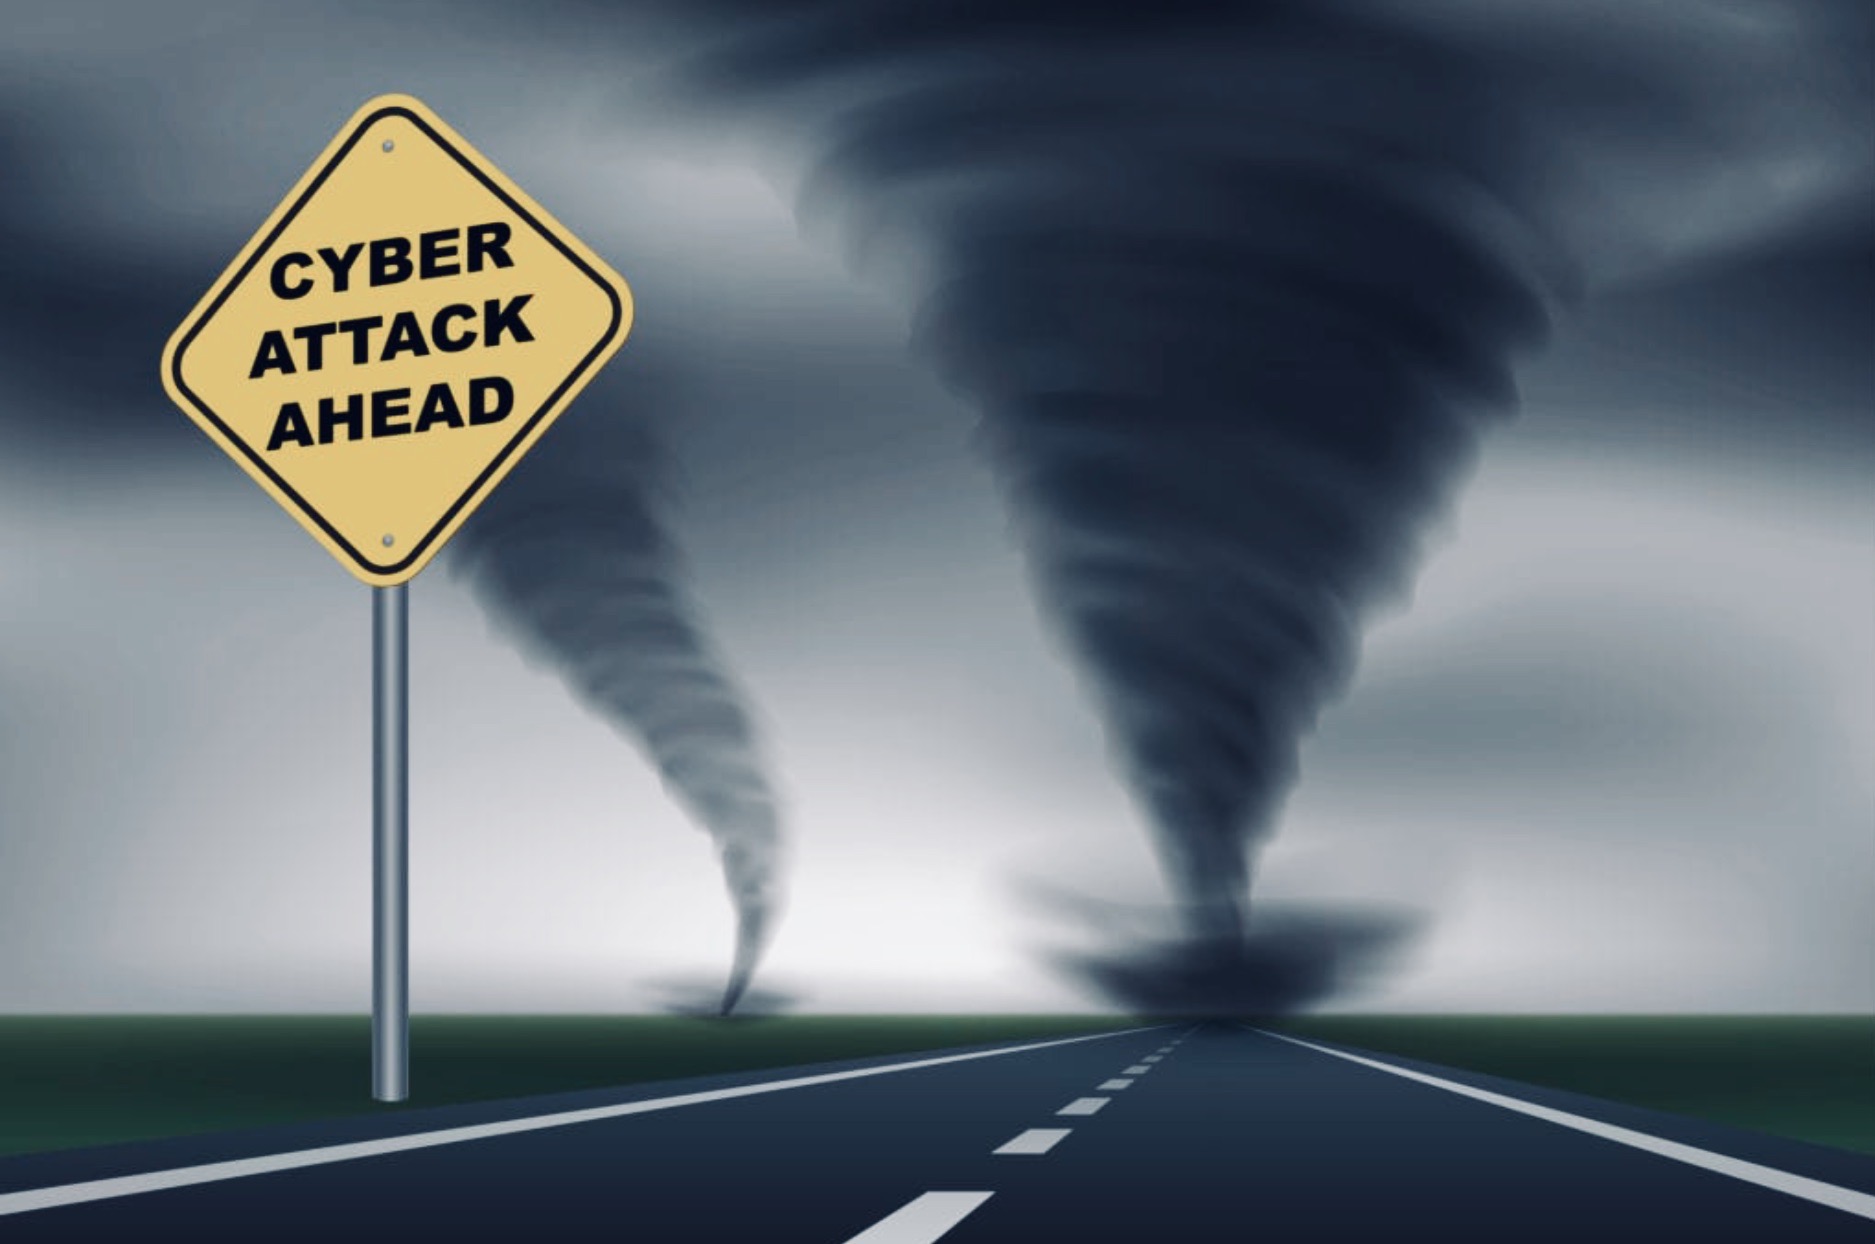 Cyber attack ahead warning sign